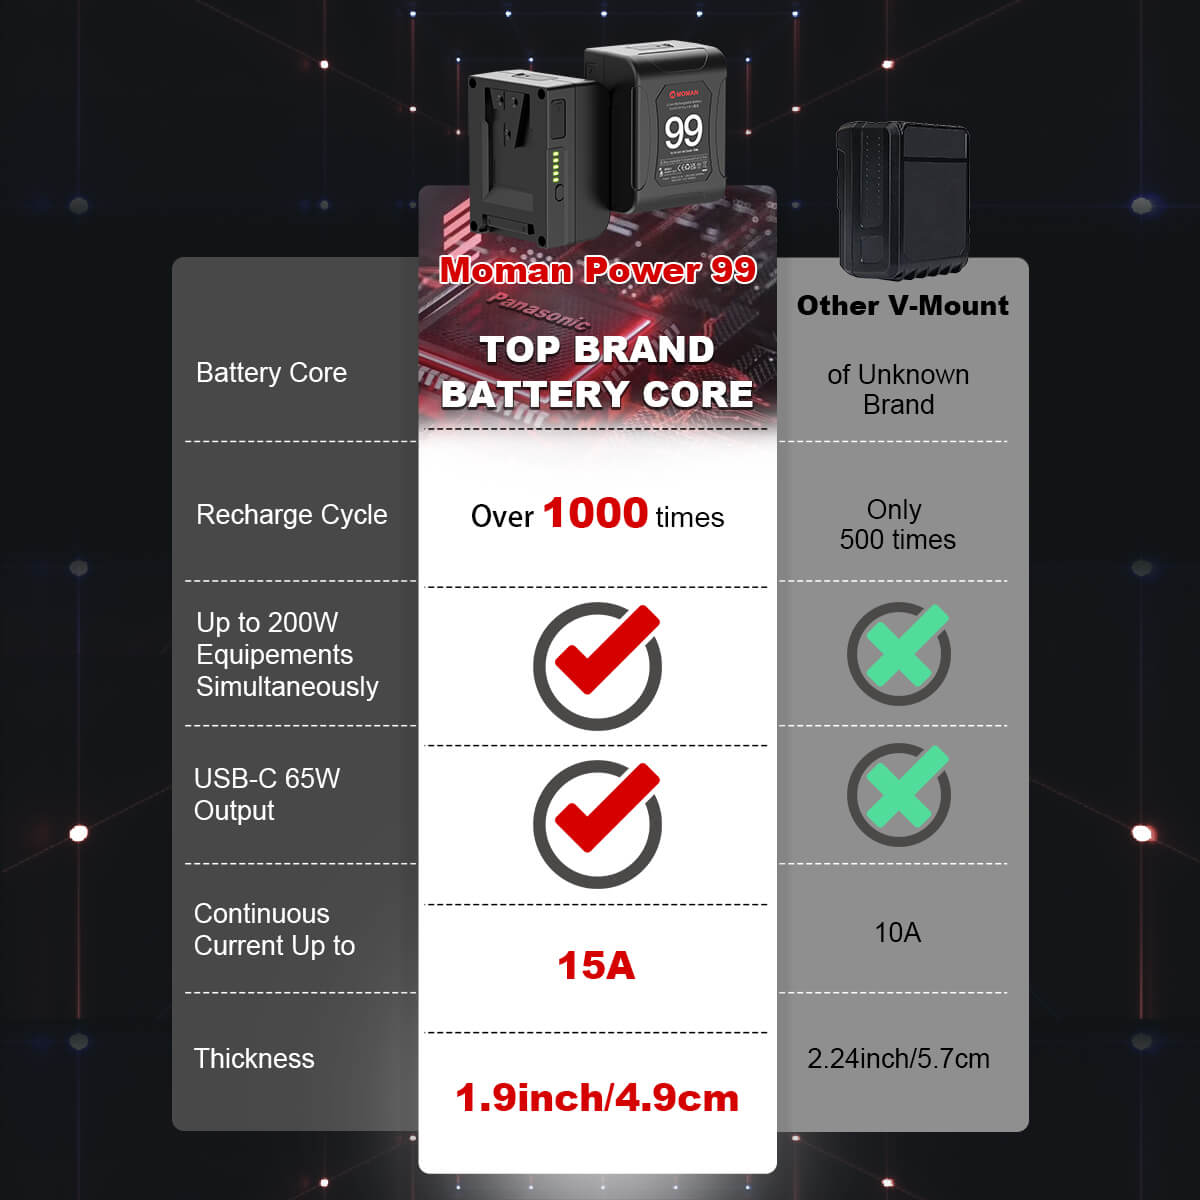 Moman Power 99 v mount li-ion battery with dtap out compared with other batteries, and it turns out its recharge cycle many times the others.